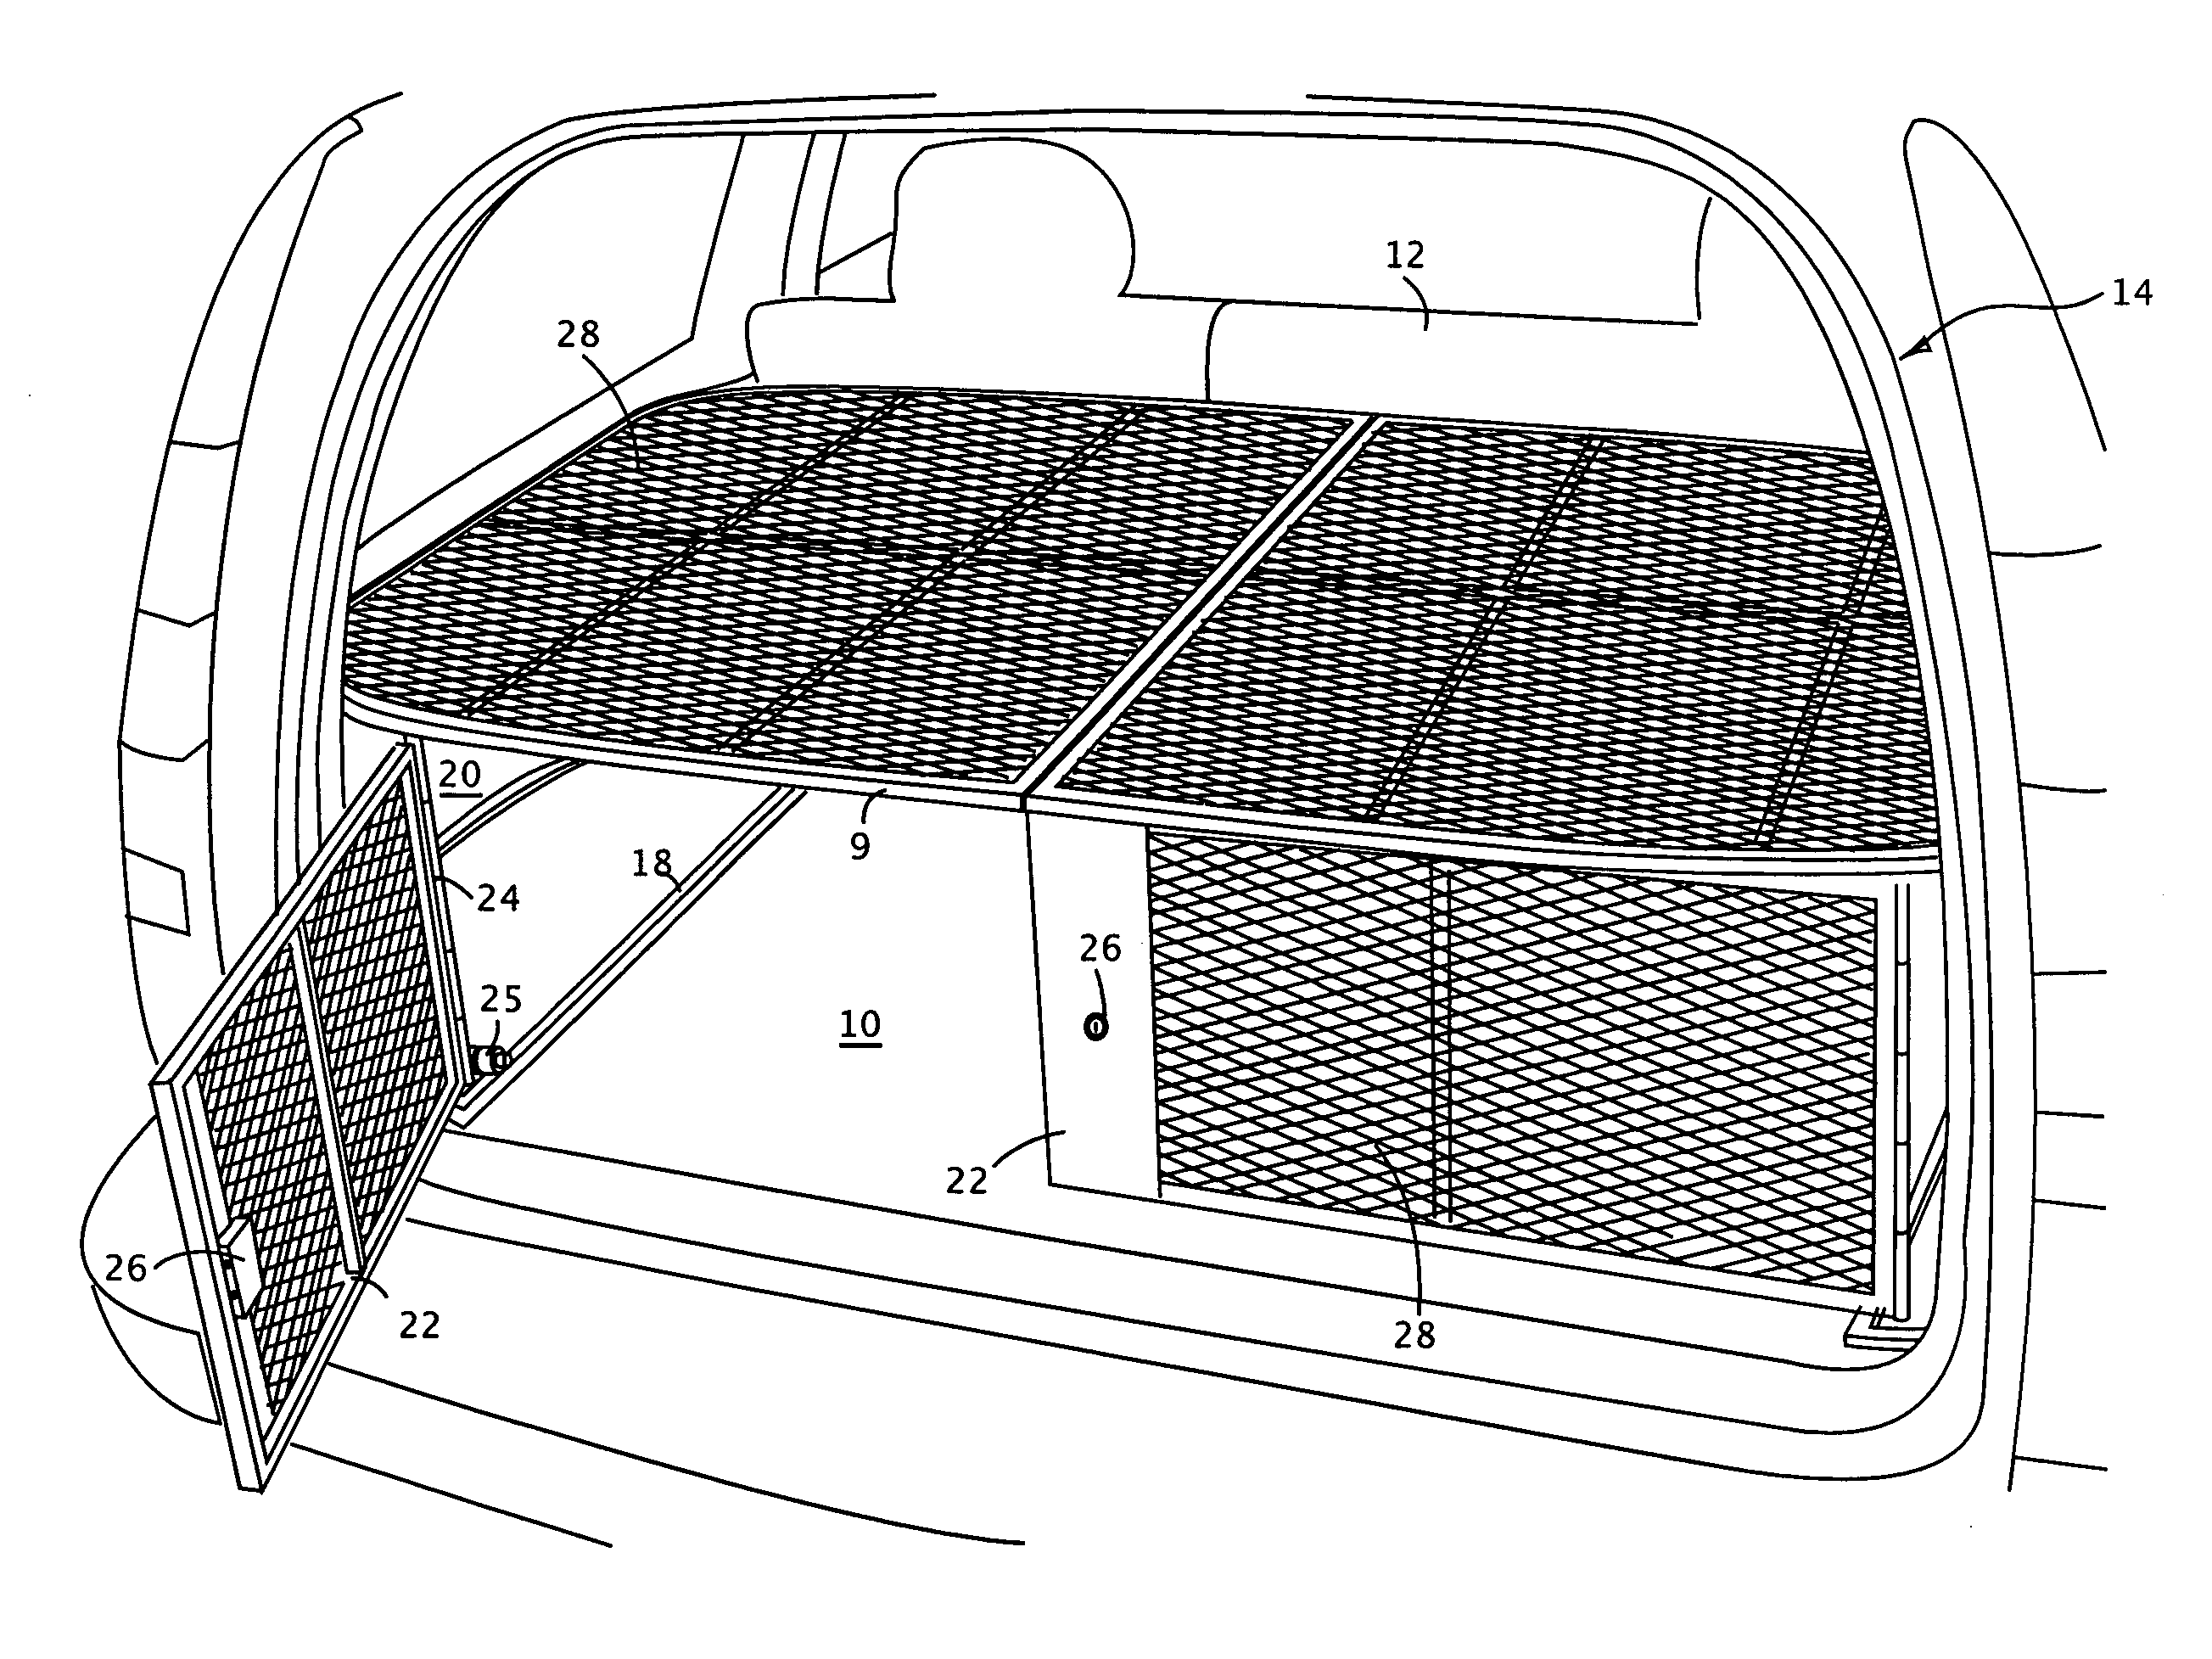 Cargo cage for an automobile